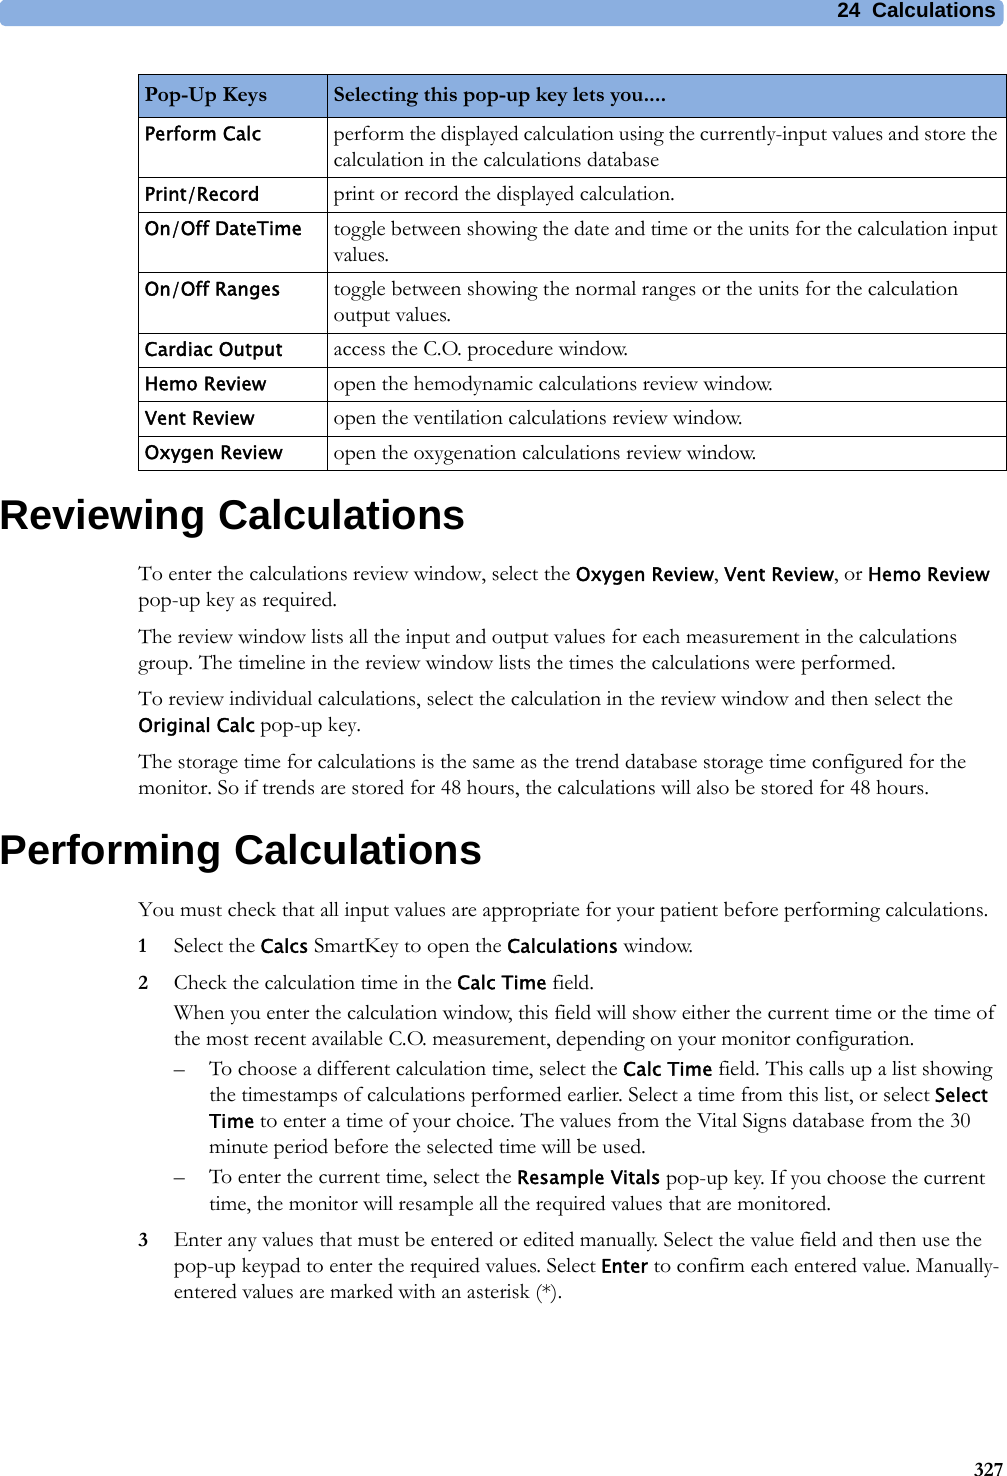 24 Calculations327Reviewing CalculationsTo enter the calculations review window, select the Oxygen Review, Vent Review, or Hemo Review pop-up key as required.The review window lists all the input and output values for each measurement in the calculations group. The timeline in the review window lists the times the calculations were performed.To review individual calculations, select the calculation in the review window and then select the Original Calc pop-up key.The storage time for calculations is the same as the trend database storage time configured for the monitor. So if trends are stored for 48 hours, the calculations will also be stored for 48 hours.Performing CalculationsYou must check that all input values are appropriate for your patient before performing calculations.1Select the Calcs SmartKey to open the Calculations window.2Check the calculation time in the Calc Time field.When you enter the calculation window, this field will show either the current time or the time of the most recent available C.O. measurement, depending on your monitor configuration.– To choose a different calculation time, select the Calc Time field. This calls up a list showing the timestamps of calculations performed earlier. Select a time from this list, or select Select Time to enter a time of your choice. The values from the Vital Signs database from the 30 minute period before the selected time will be used.– To enter the current time, select the Resample Vitals pop-up key. If you choose the current time, the monitor will resample all the required values that are monitored.3Enter any values that must be entered or edited manually. Select the value field and then use the pop-up keypad to enter the required values. Select Enter to confirm each entered value. Manually-entered values are marked with an asterisk (*).Perform Calc perform the displayed calculation using the currently-input values and store the calculation in the calculations databasePrint/Record print or record the displayed calculation.On/Off DateTime toggle between showing the date and time or the units for the calculation input values.On/Off Ranges toggle between showing the normal ranges or the units for the calculation output values.Cardiac Output access the C.O. procedure window.Hemo Review open the hemodynamic calculations review window.Vent Review open the ventilation calculations review window.Oxygen Review open the oxygenation calculations review window.Pop-Up Keys Selecting this pop-up key lets you....